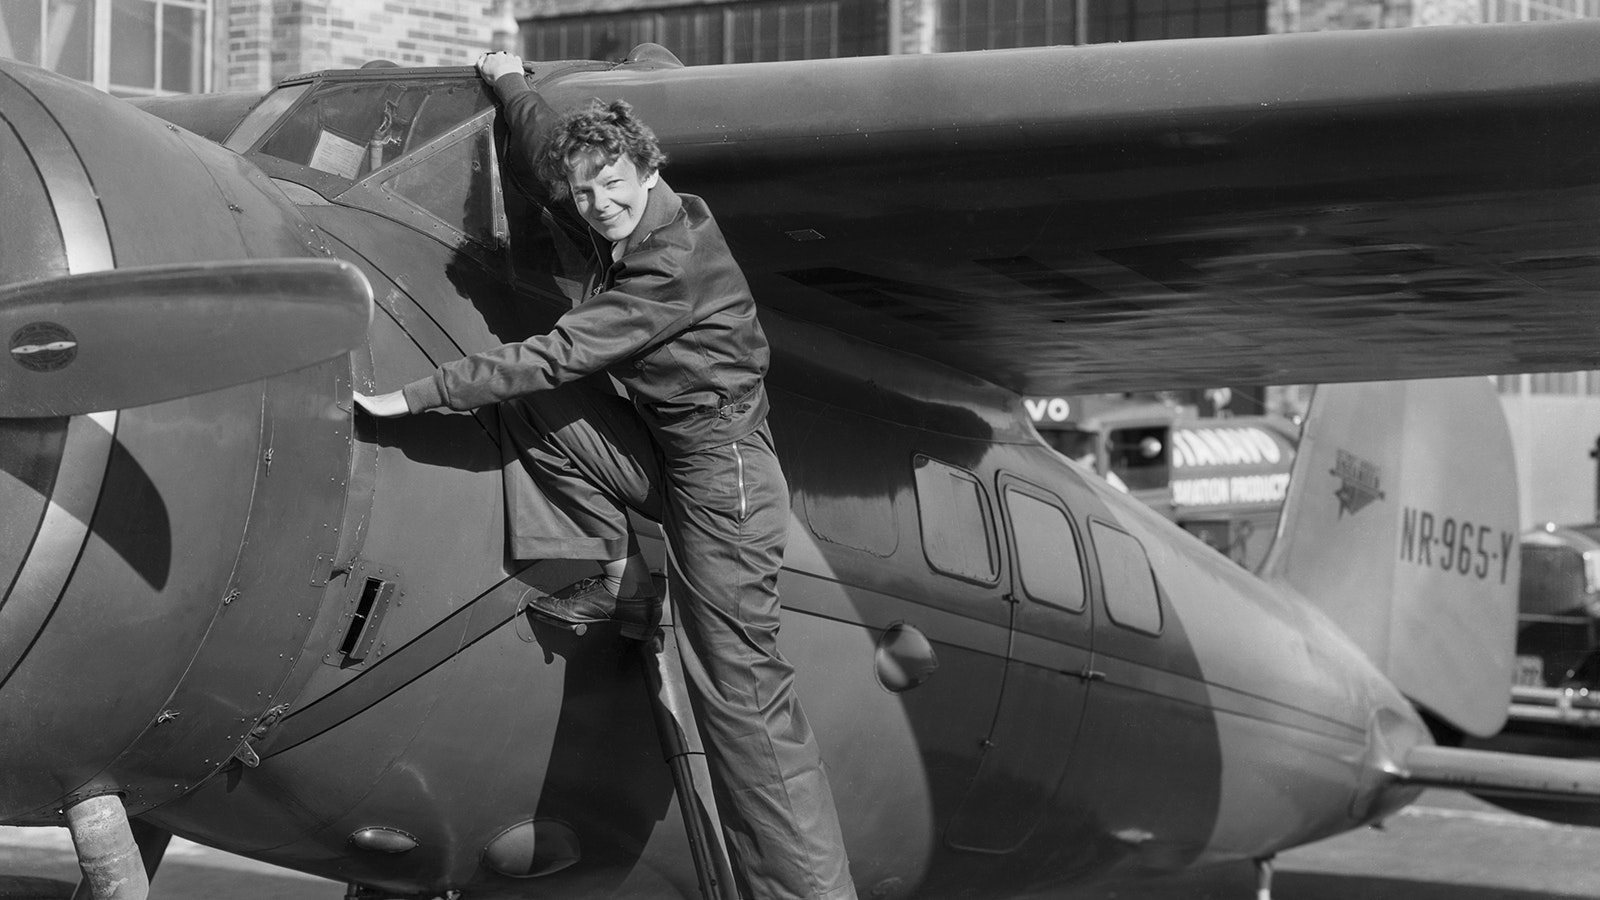 Amelia Earhart climbing into the cockpit of an aircraft in this undated photo.